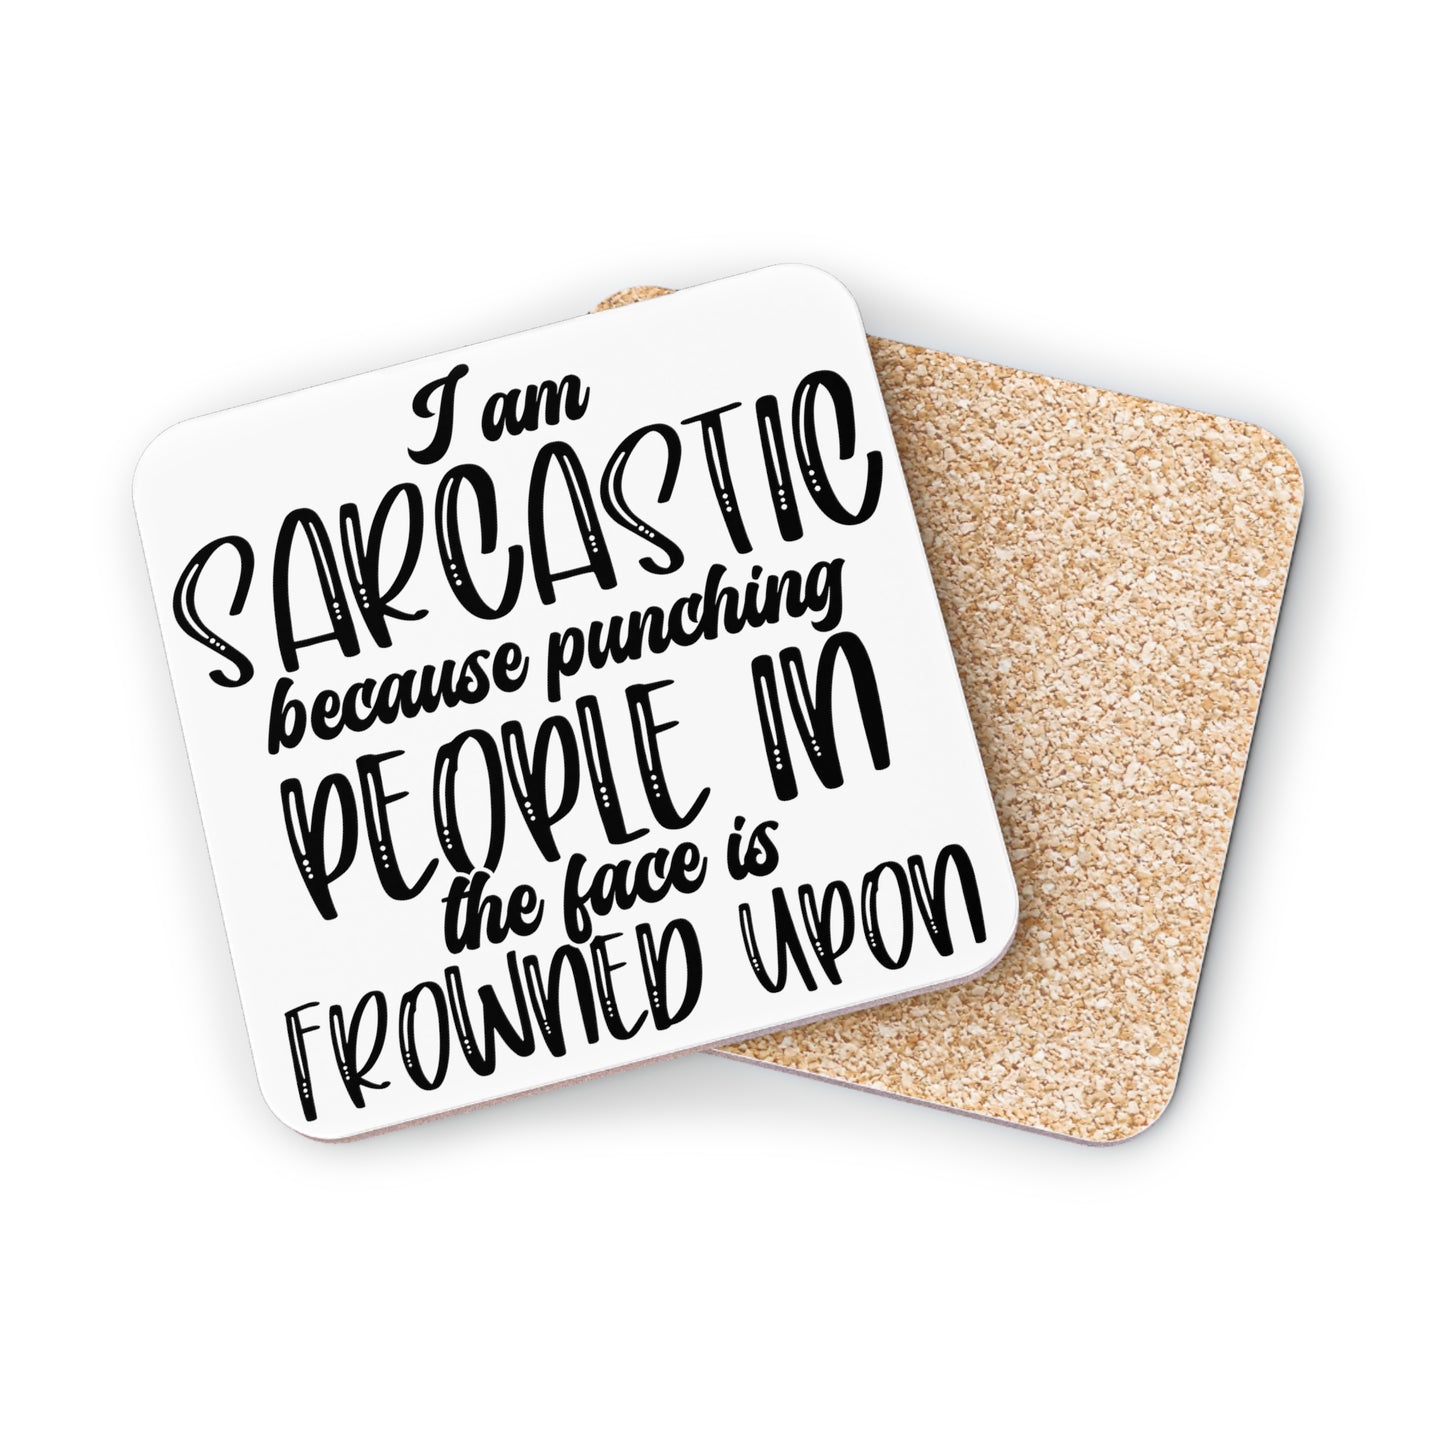 "I'm Sarcastic Because Punching People In The Face Is Frowned Upon" Square Coasters